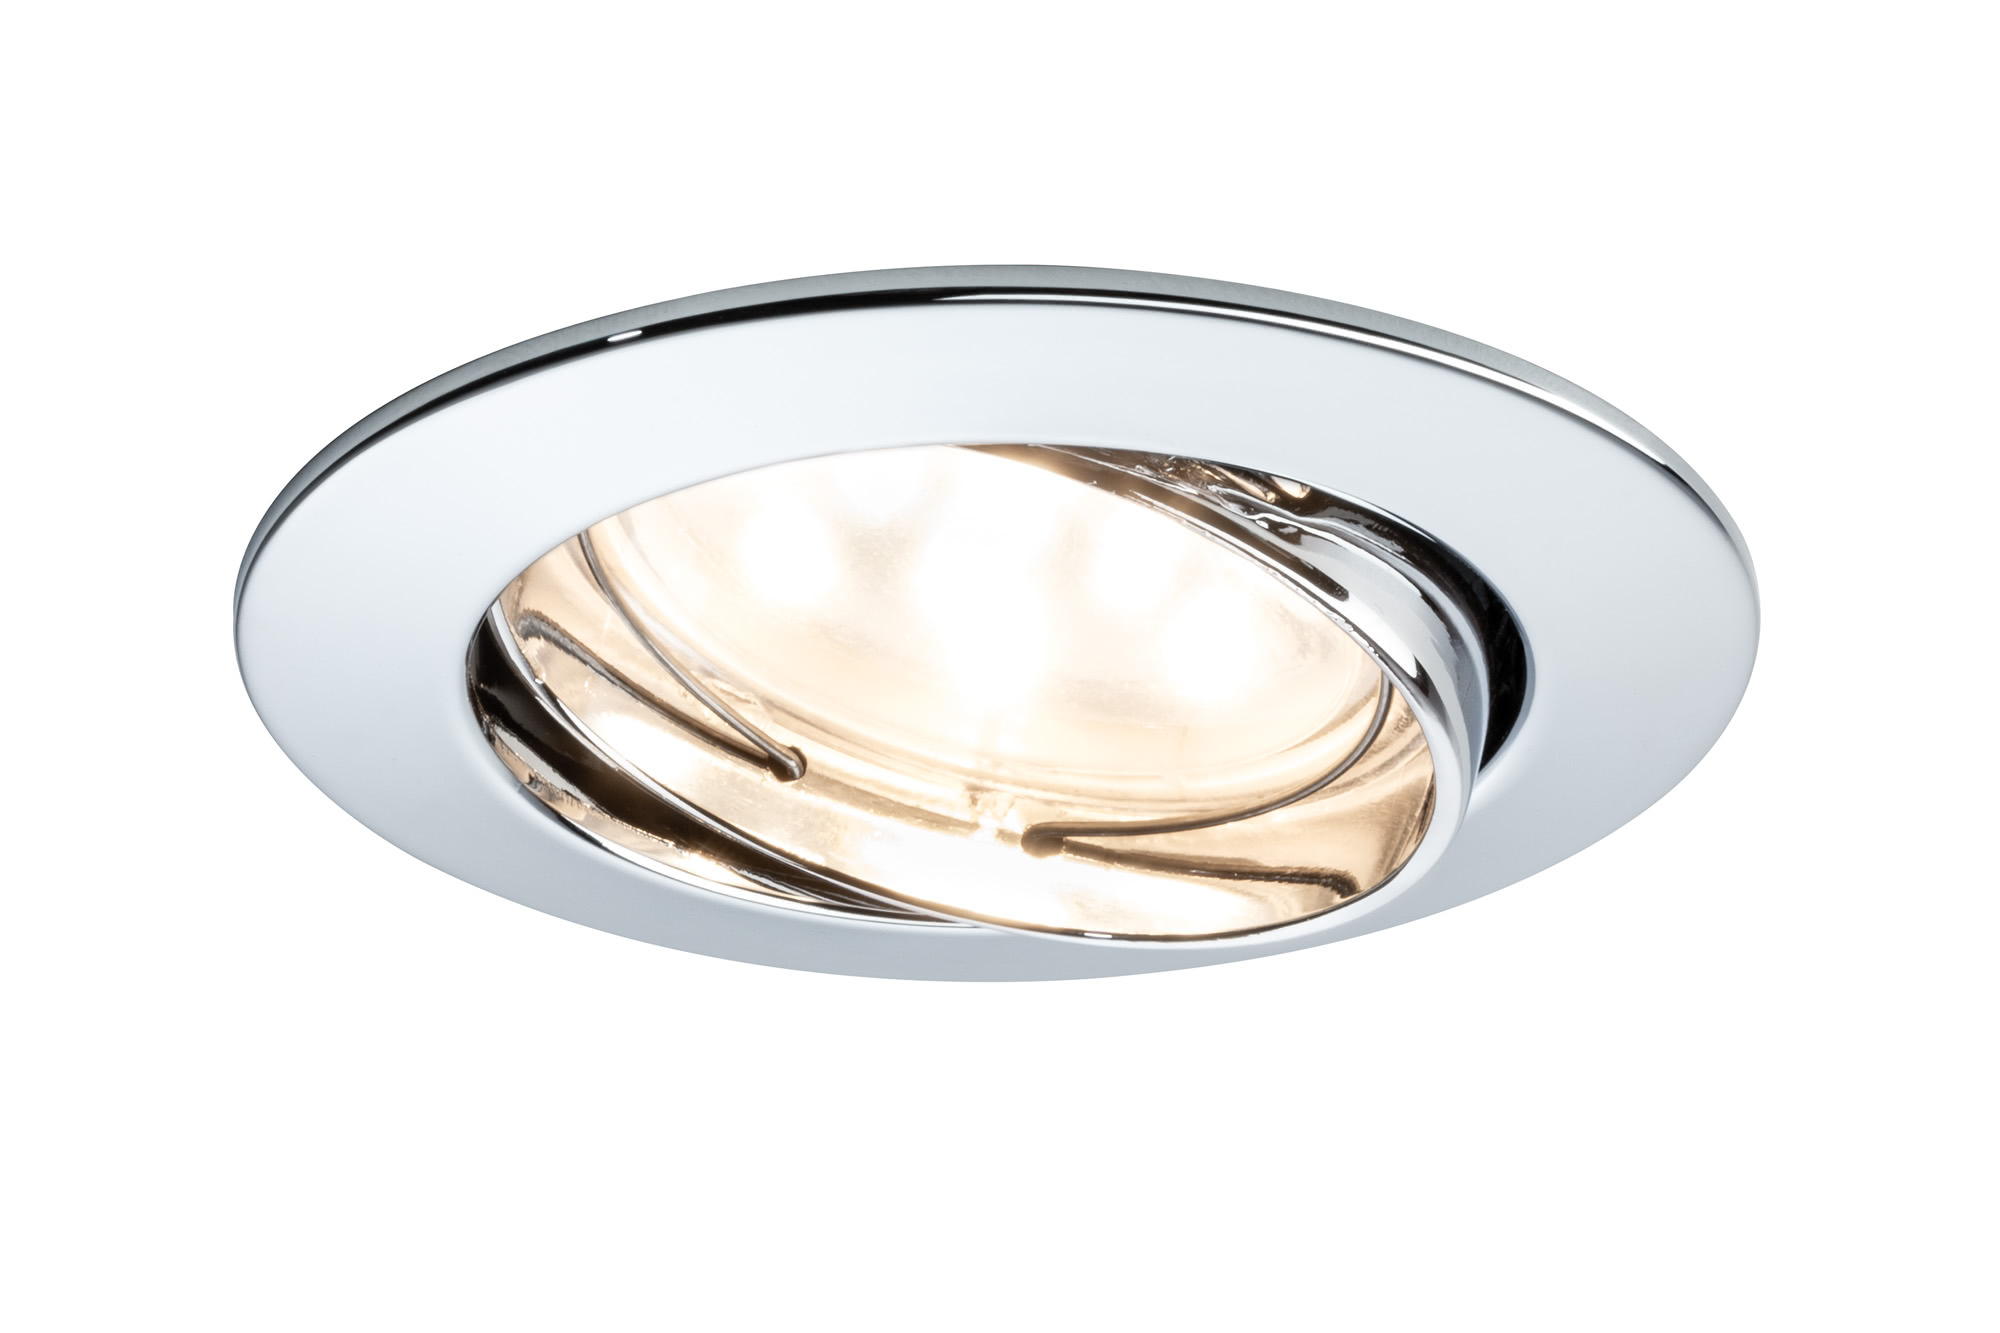 Recessed luminaire LED Coin clear round 6,8В W chrome 3-piece set, swivelling